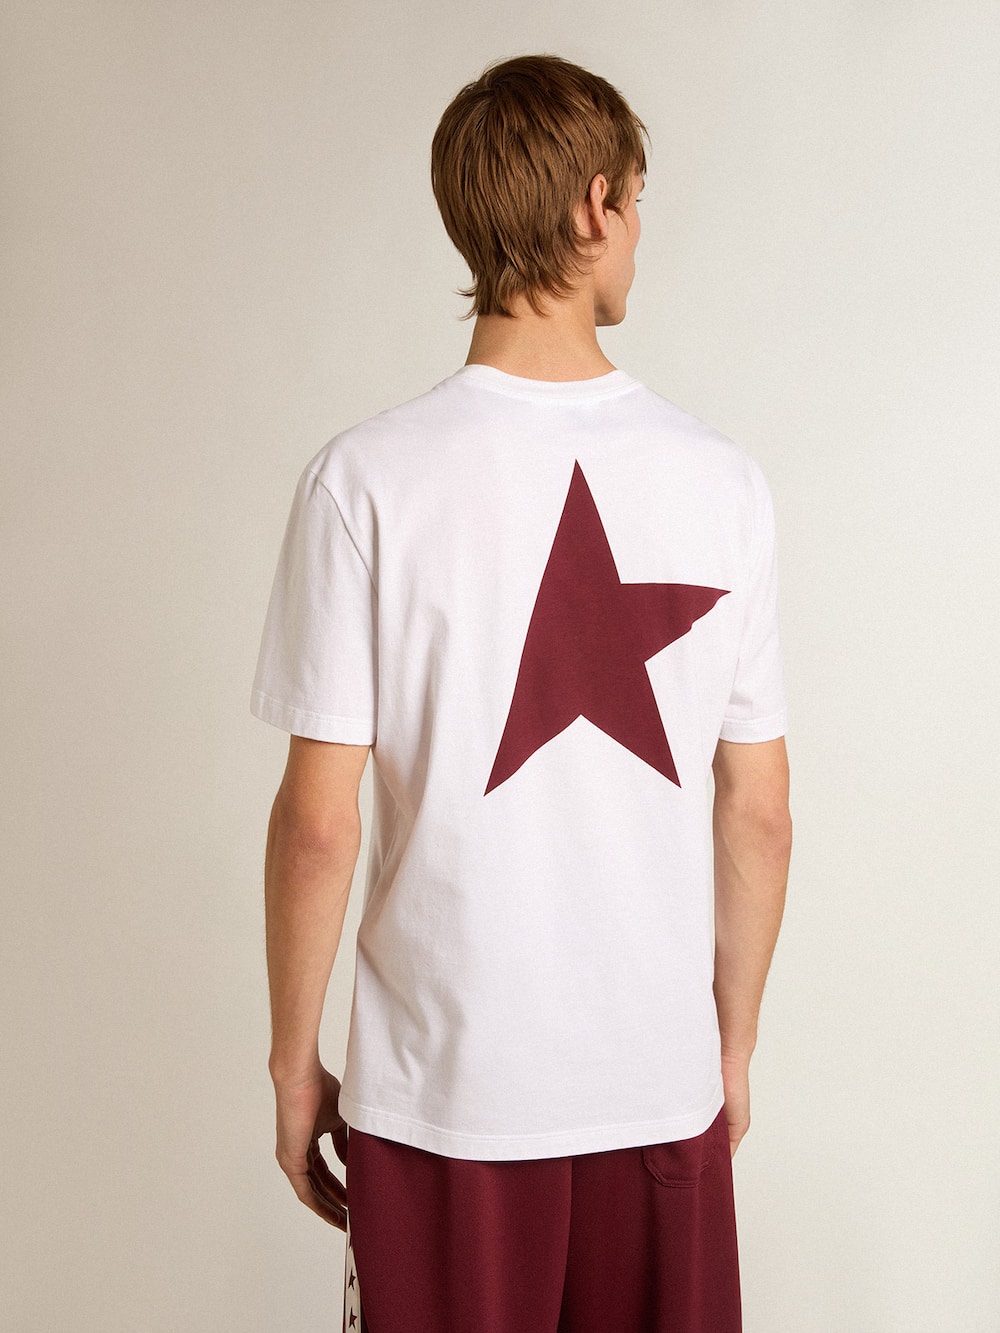 Golden Goose - Men's white T-shirt with contrasting burgundy logo and star in 